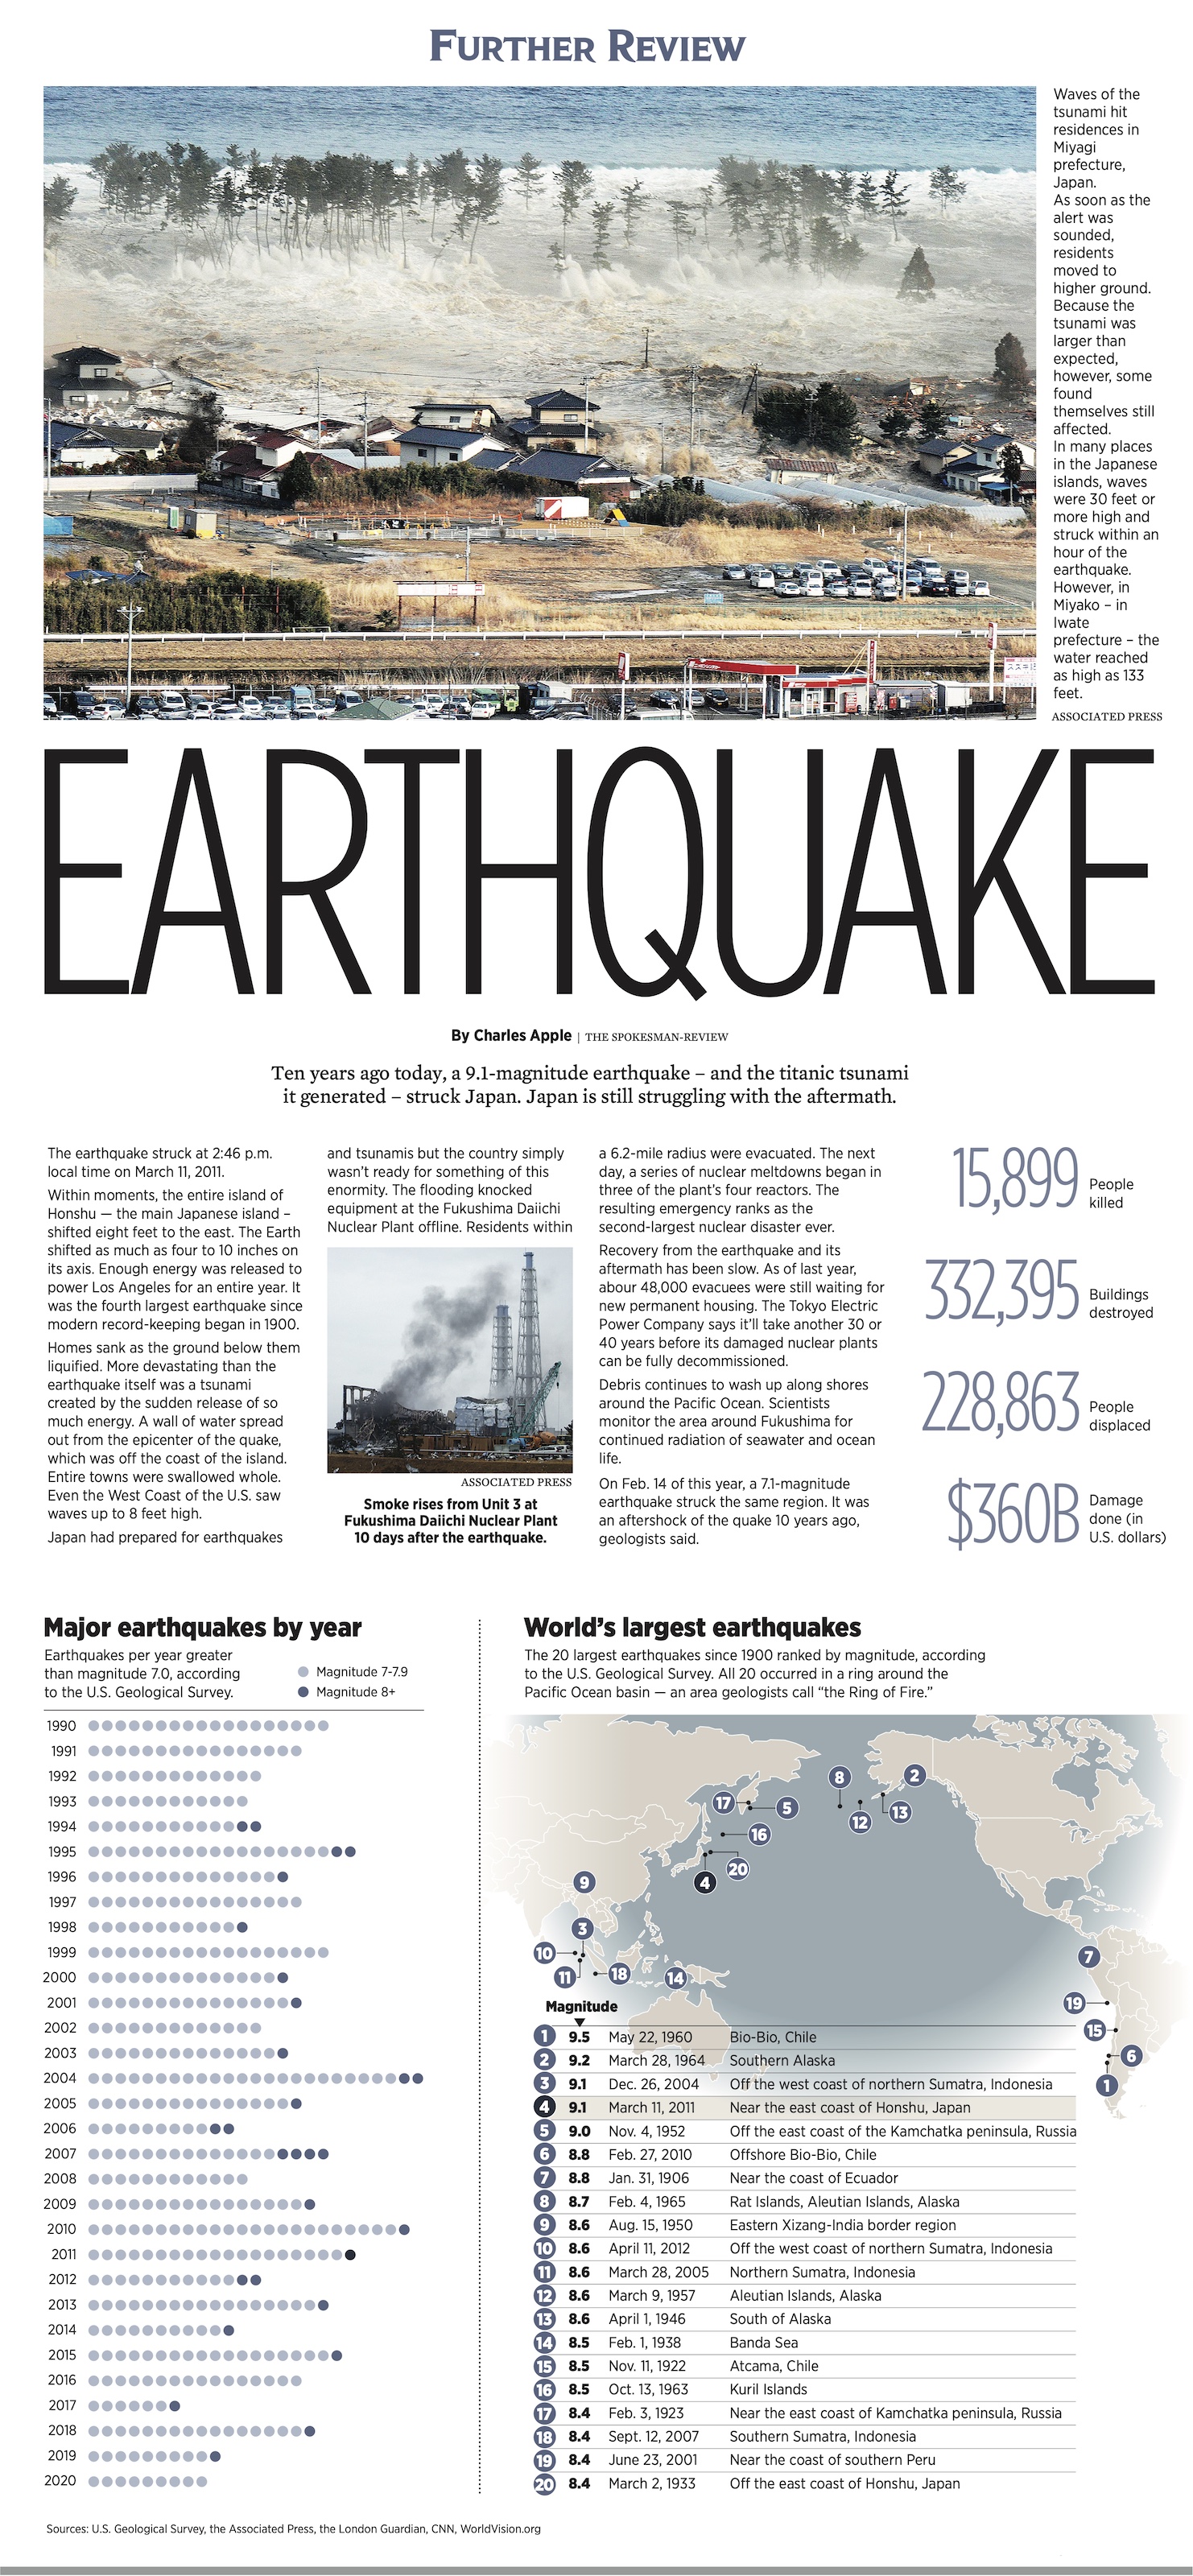 Futher Review for World’s largest earthquakes The SpokesmanReview